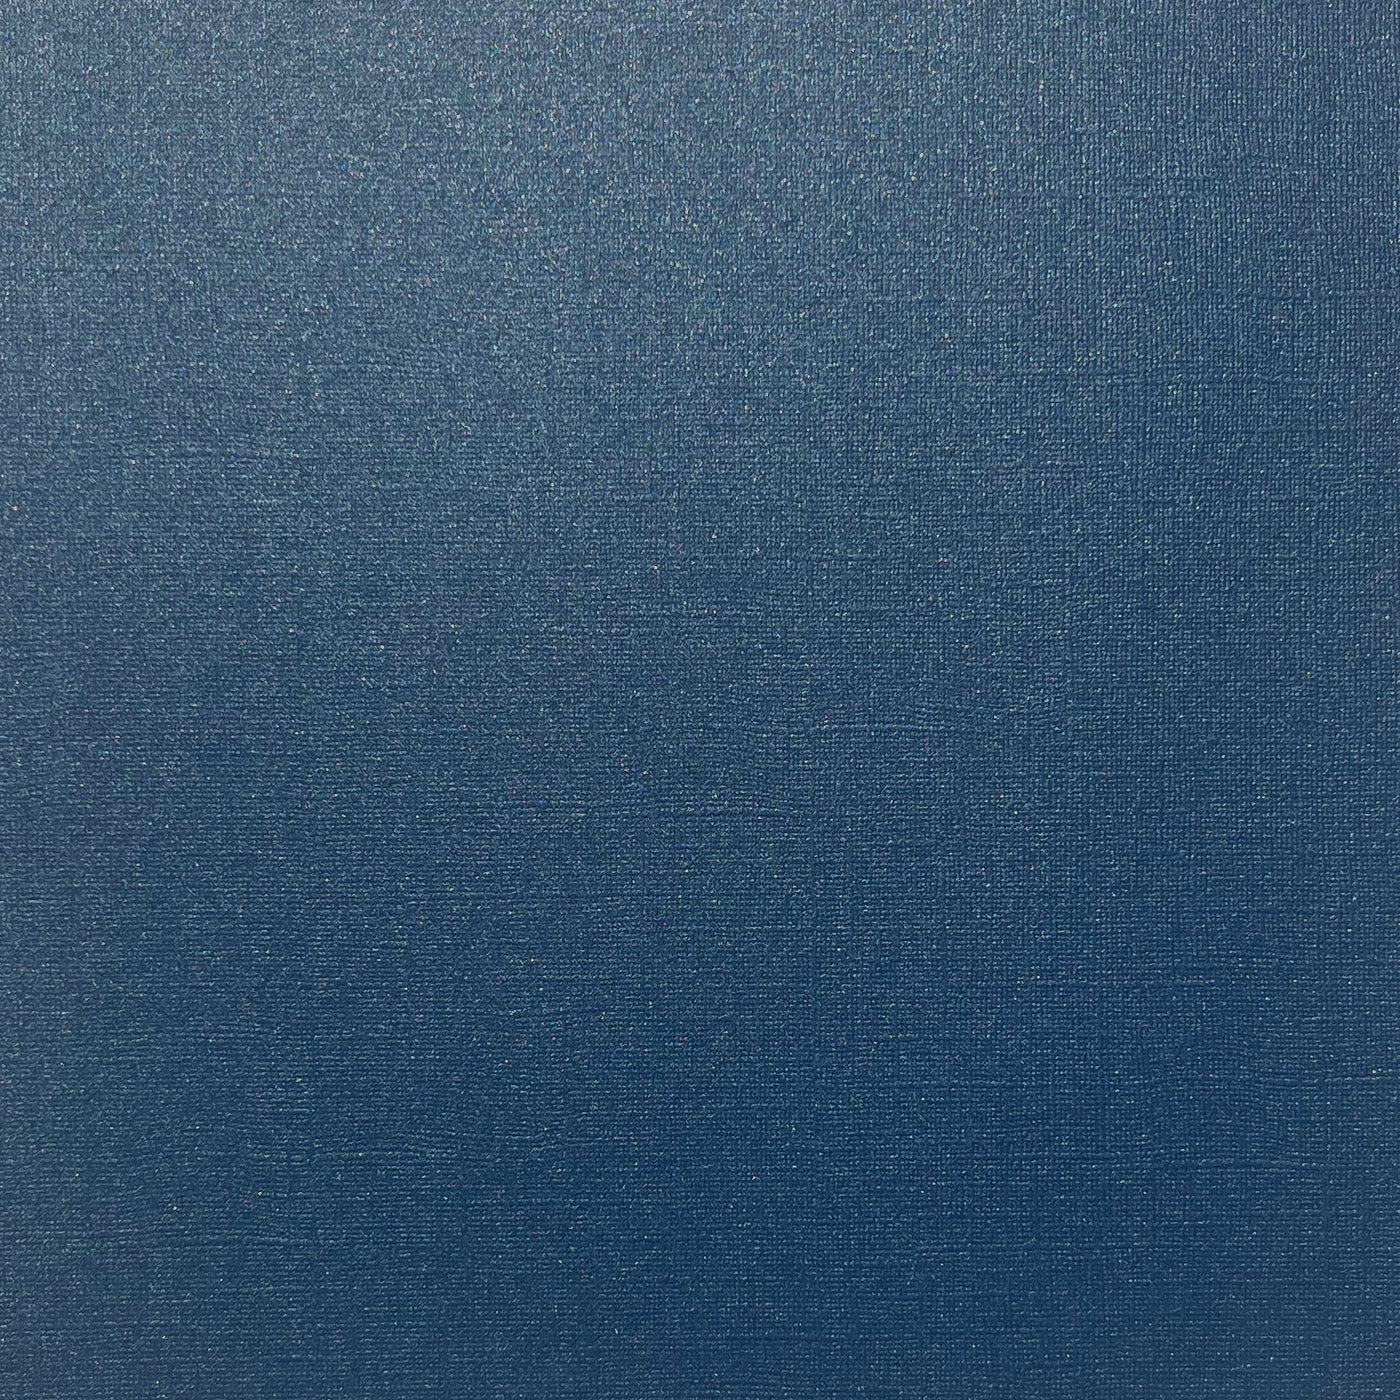 SAPPHIRE SPARKLE - Glimmer 12x12 Cardstock - My Colors